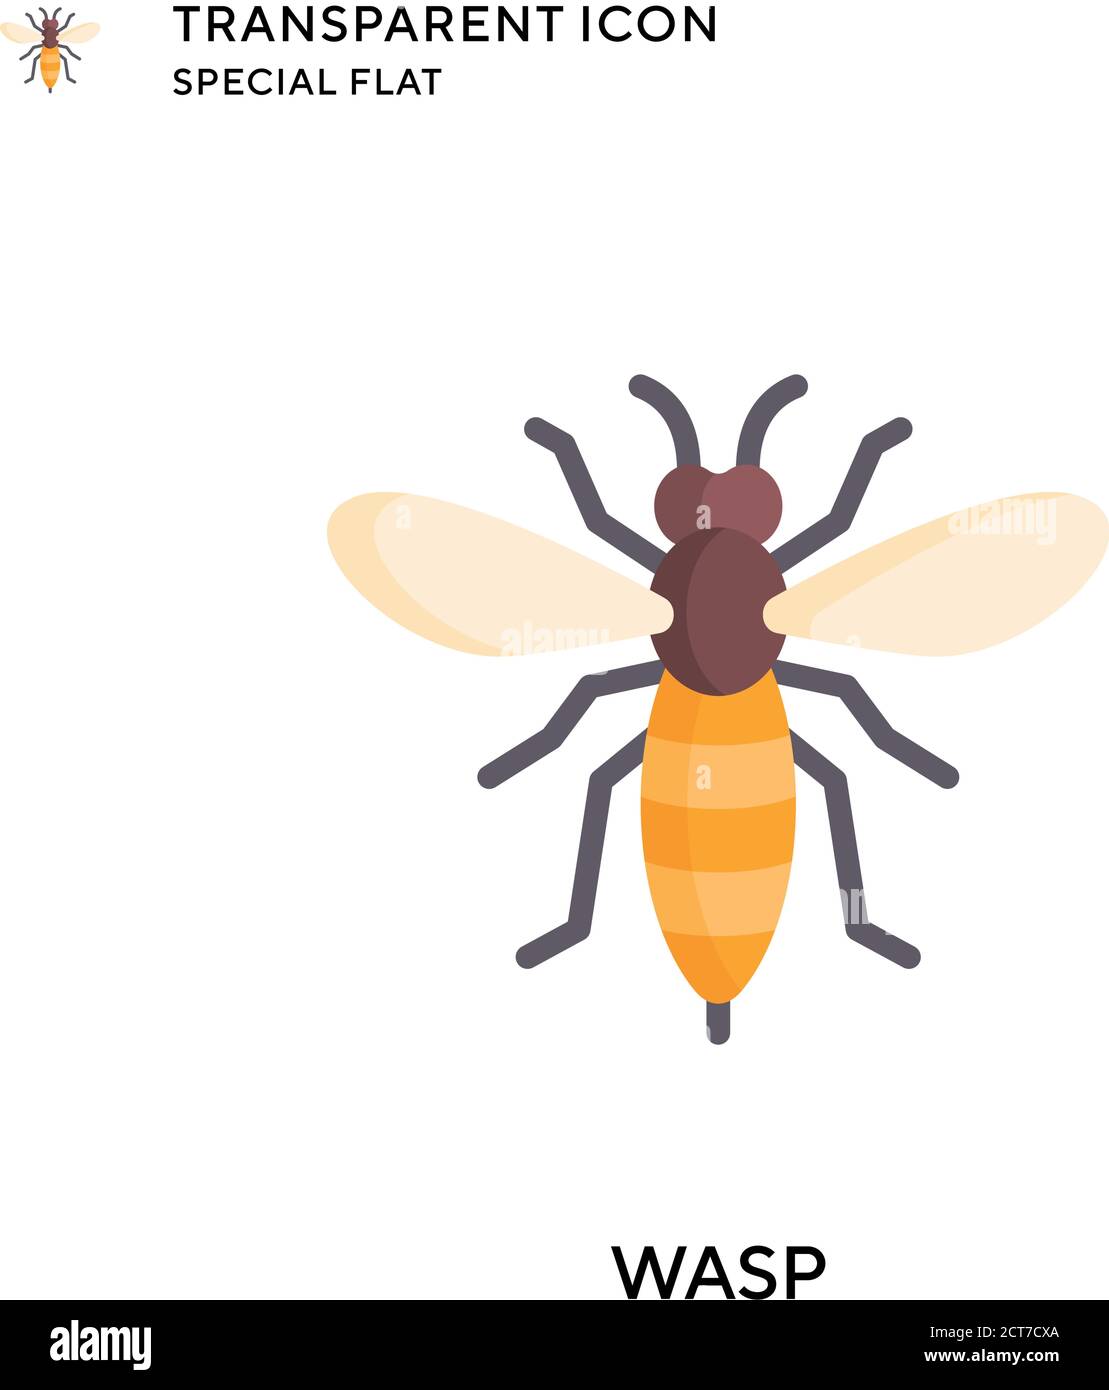 Wasp vector icon. Flat style illustration. EPS 10 vector. Stock Vector